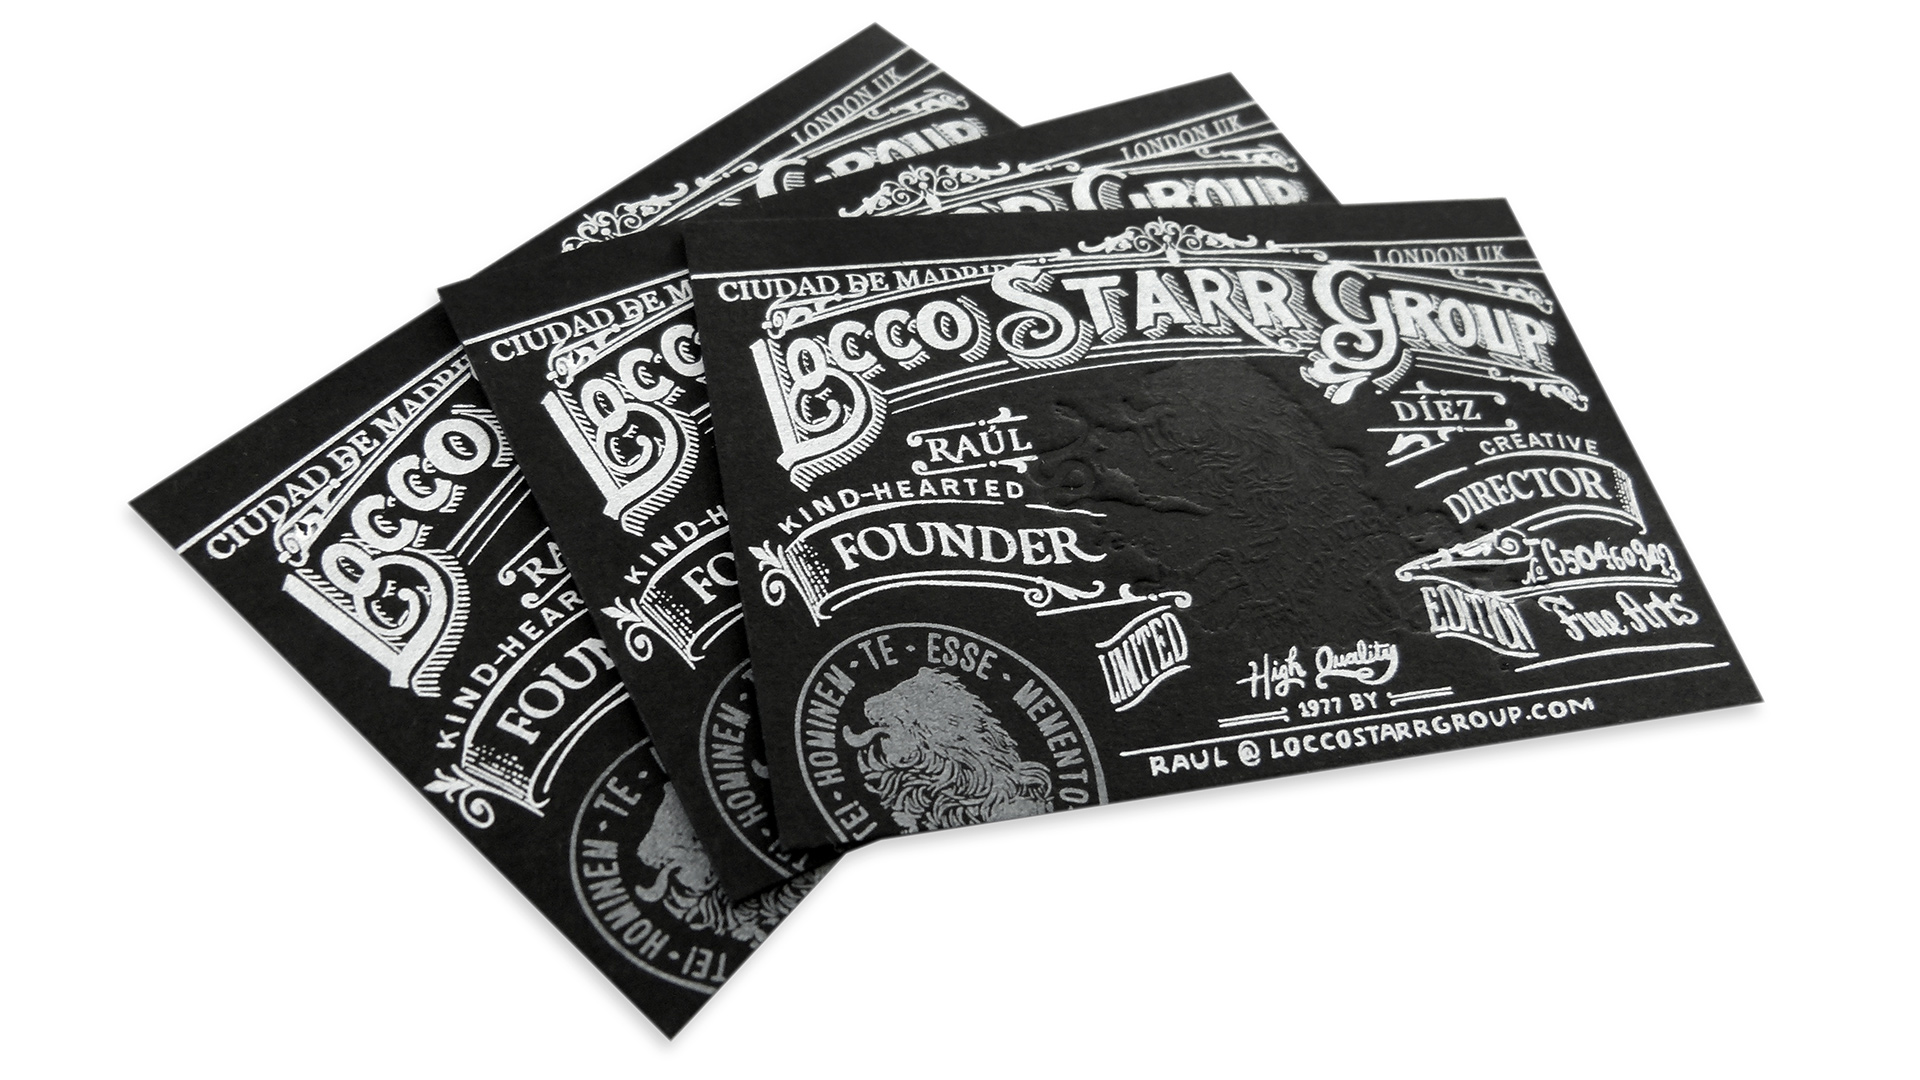 Locco Starr Group Business Cards - PaperSpecs